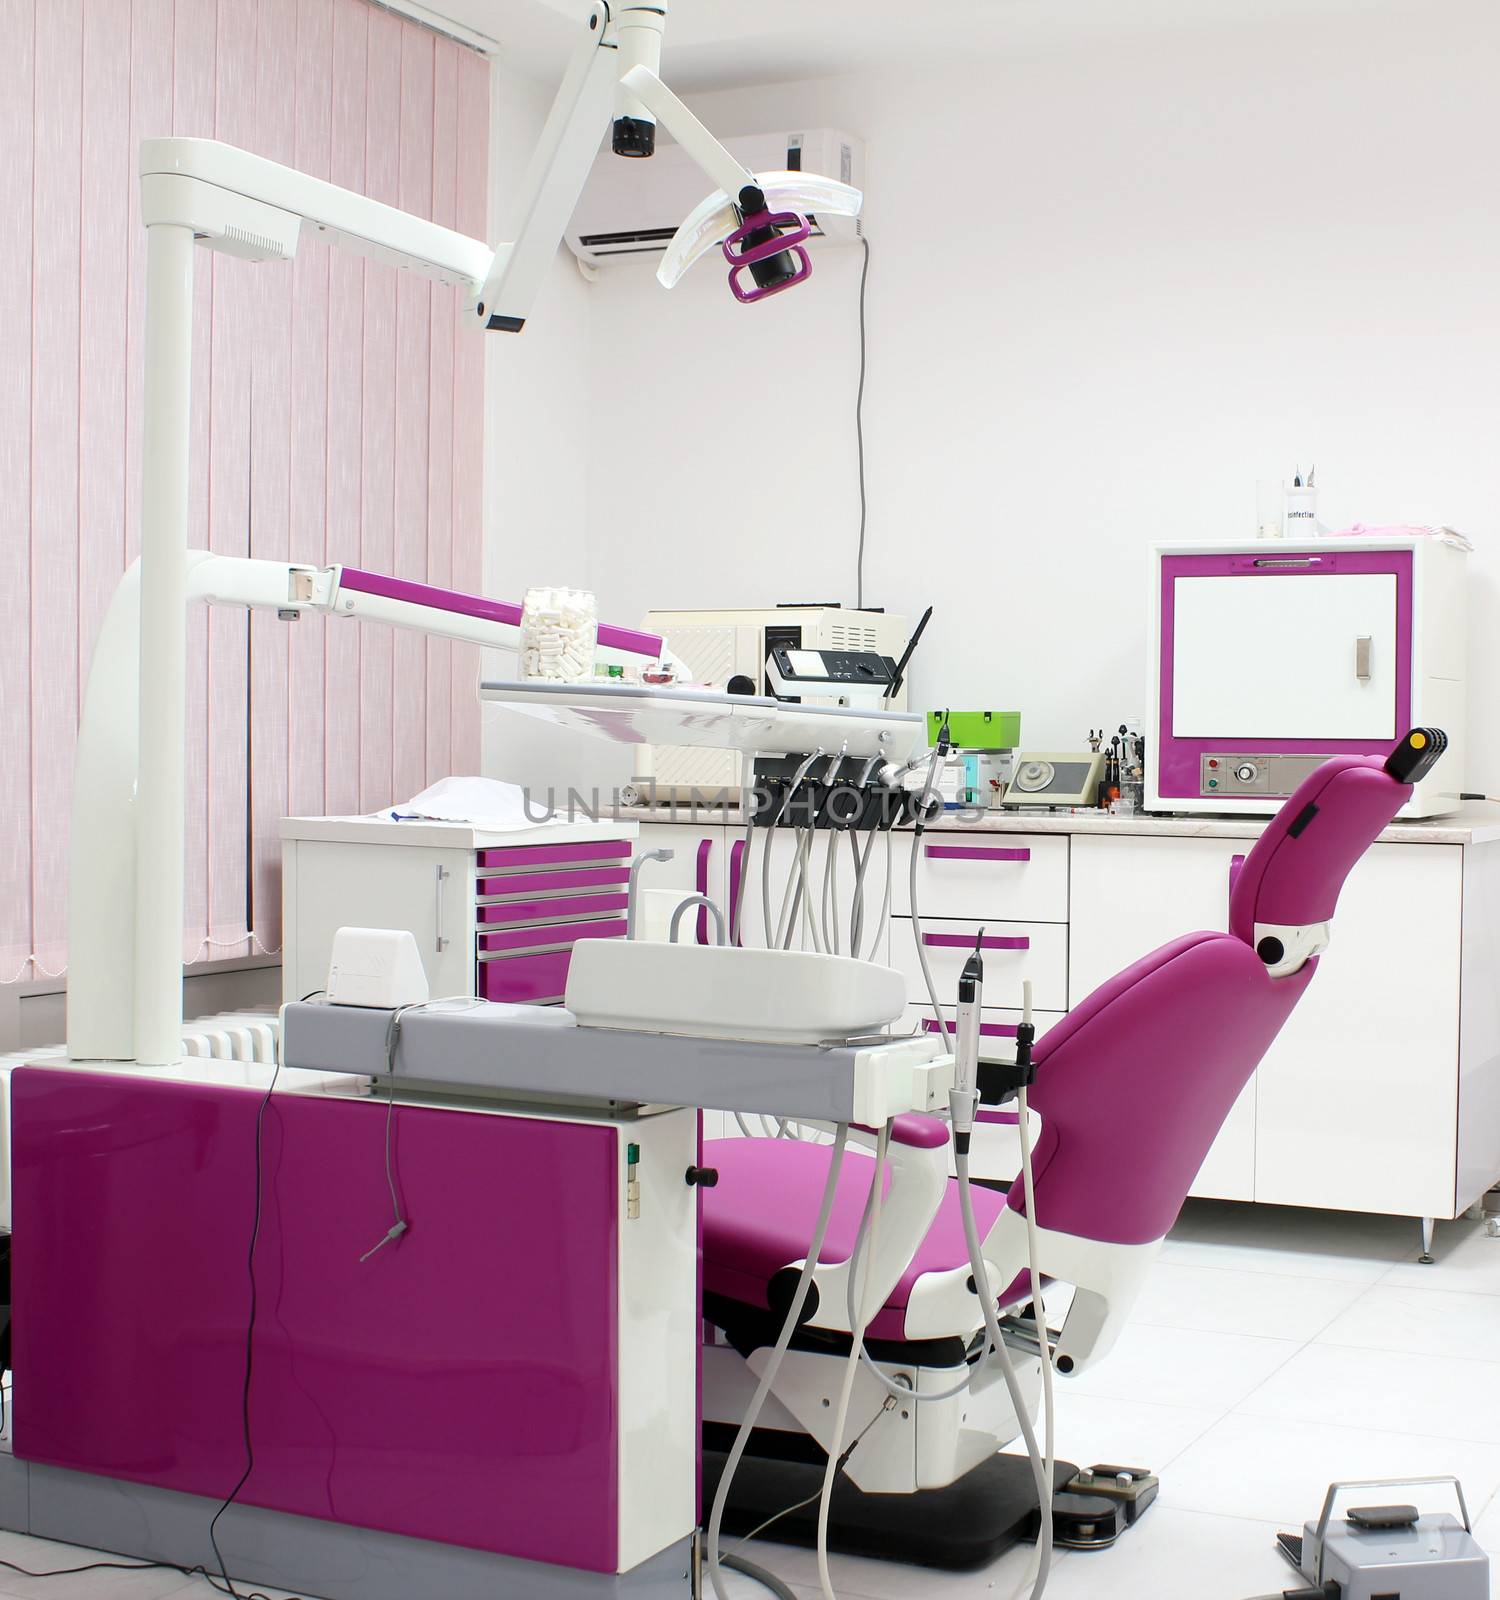 dentist office with equipment interior